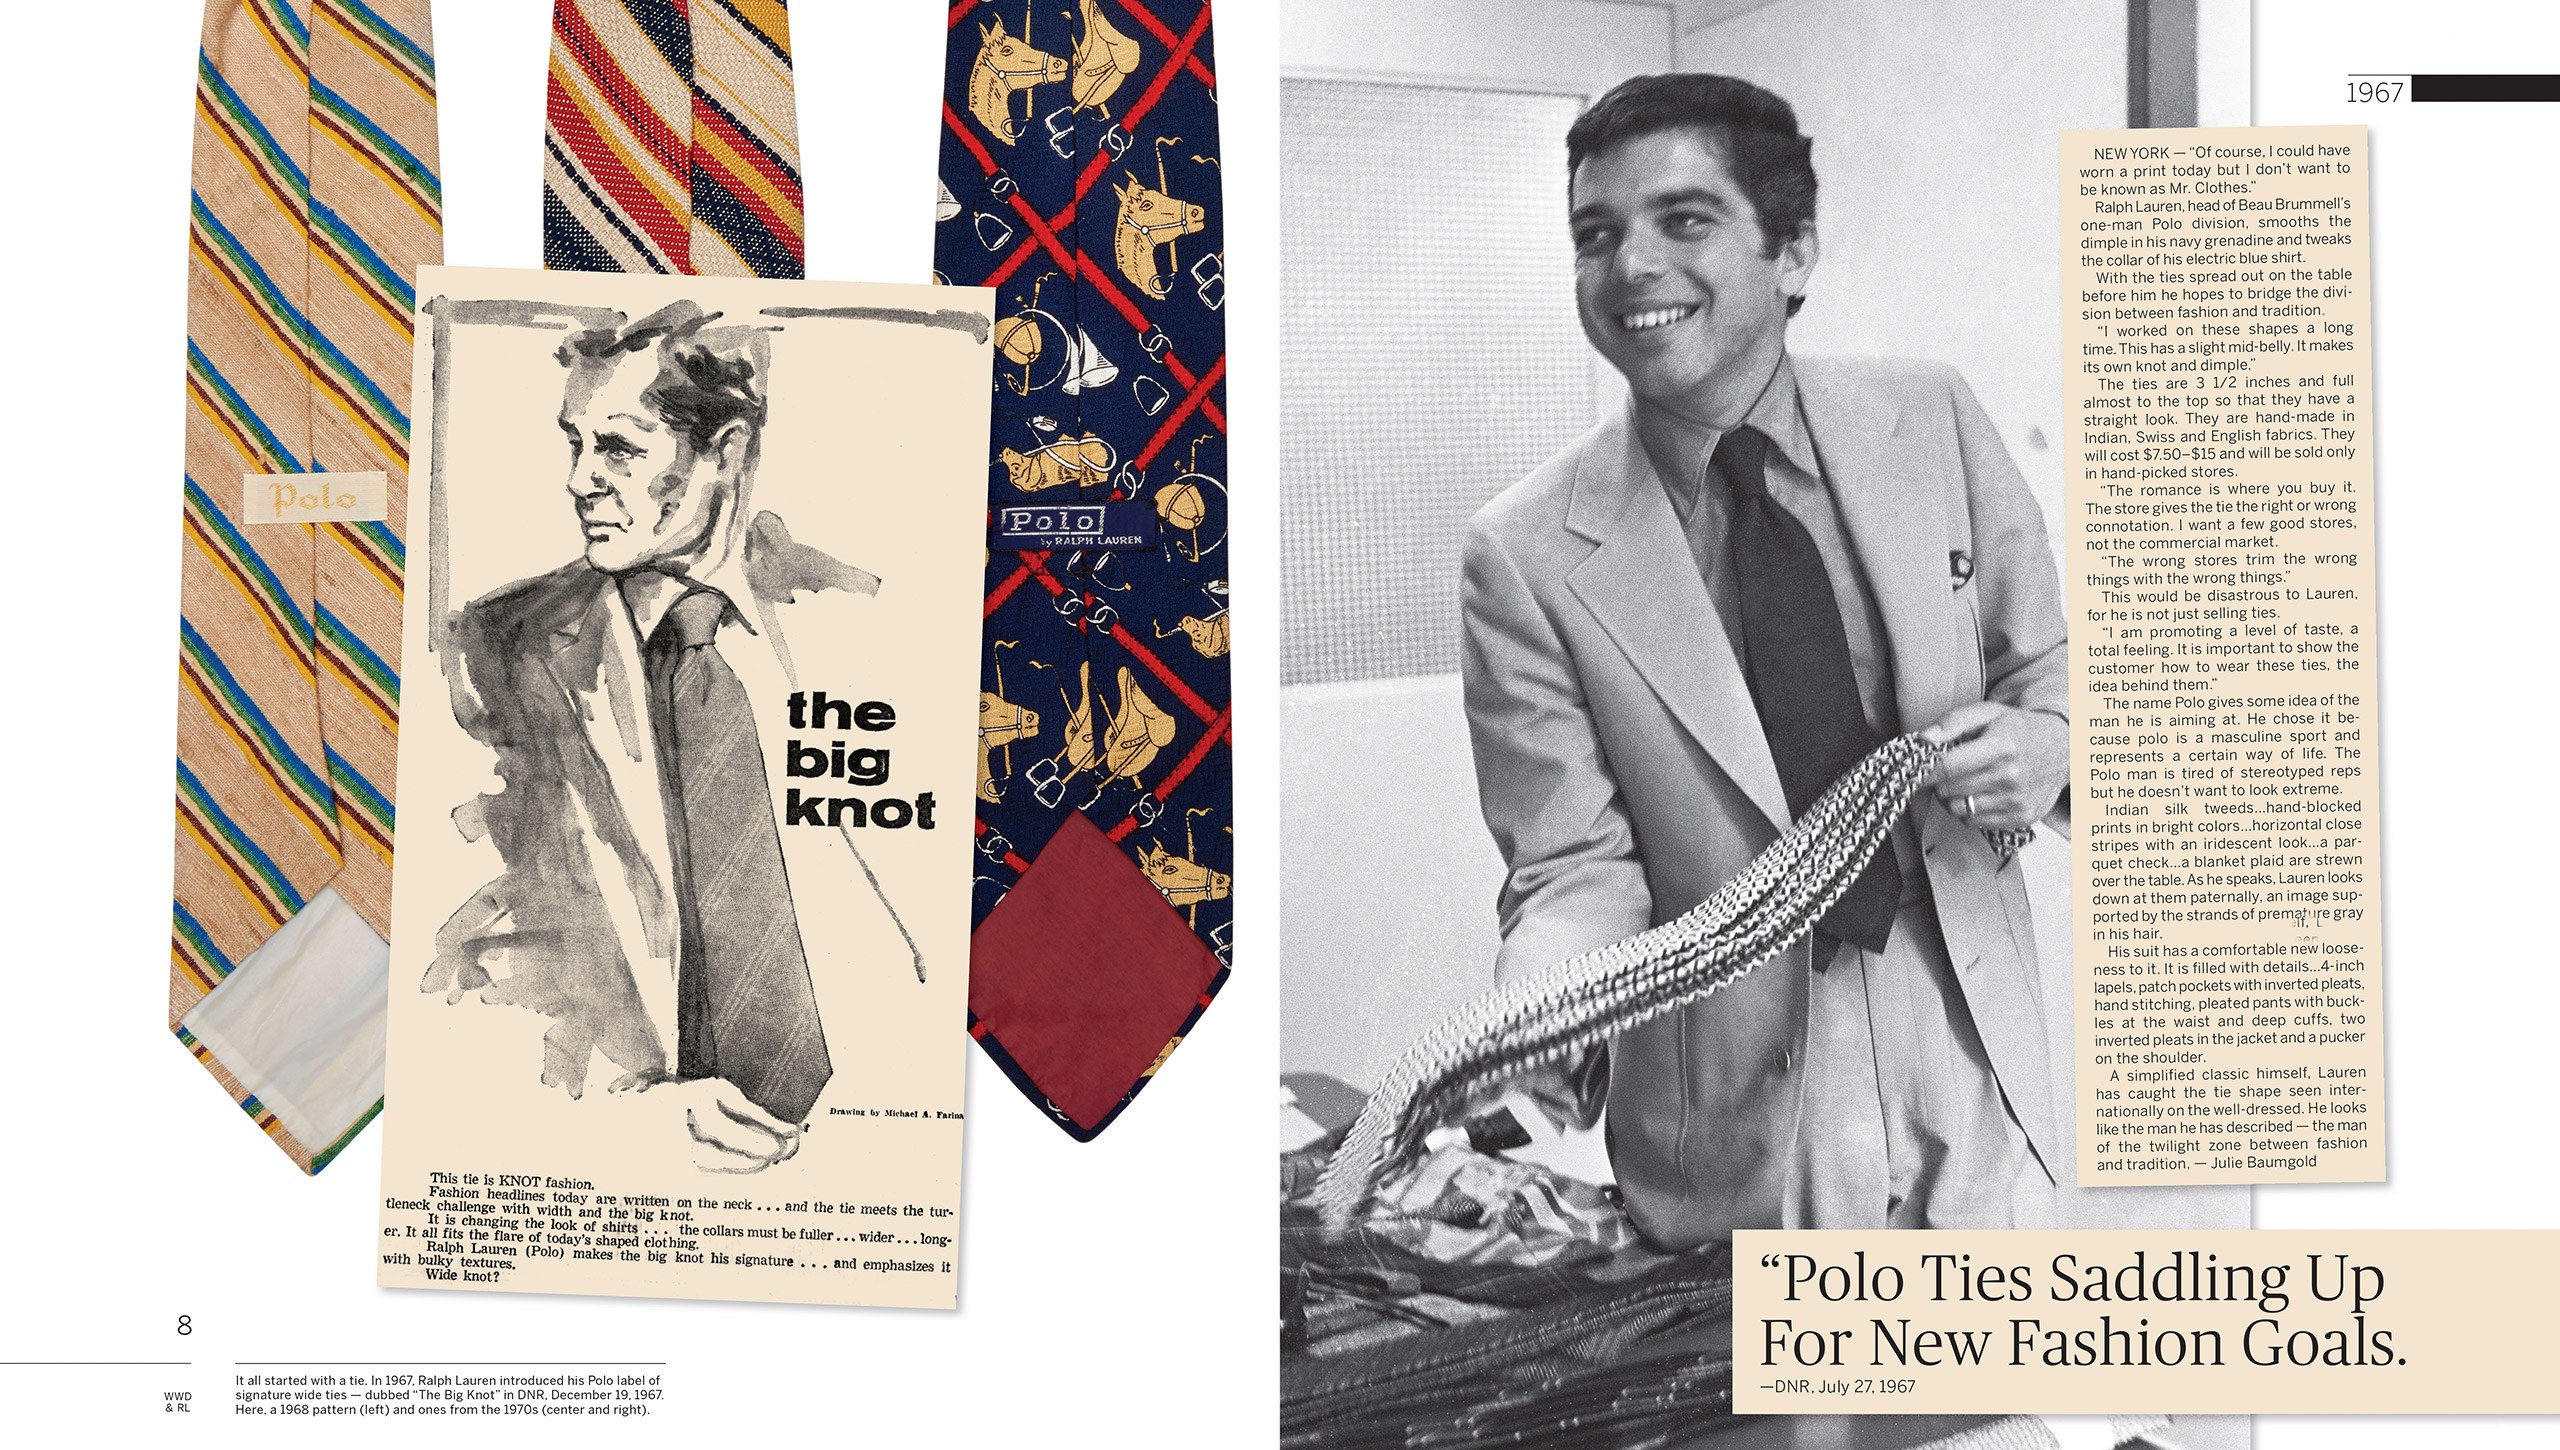 1967: Polo by Ralph Lauren is born, first as a selection of wide neckties, handmade in fine Indian, Swiss, and English fabrics. &#x201C;I worked on these shapes a long time,&#x201D; Mr. Lauren tells <em>DNR</em>. &#x201C;This has a slight mid-belly. It makes its own knot and dimple.&#x201D; Though Polo is still a one-man division of the Beau Brummell company, Mr. Lauren&#x2019;s vision for his label&#x2019;s potential is already crystal clear. &#x201C;I am promoting a level of taste,&#x201D; he says, &#x201C;a total feeling.&#x201D;